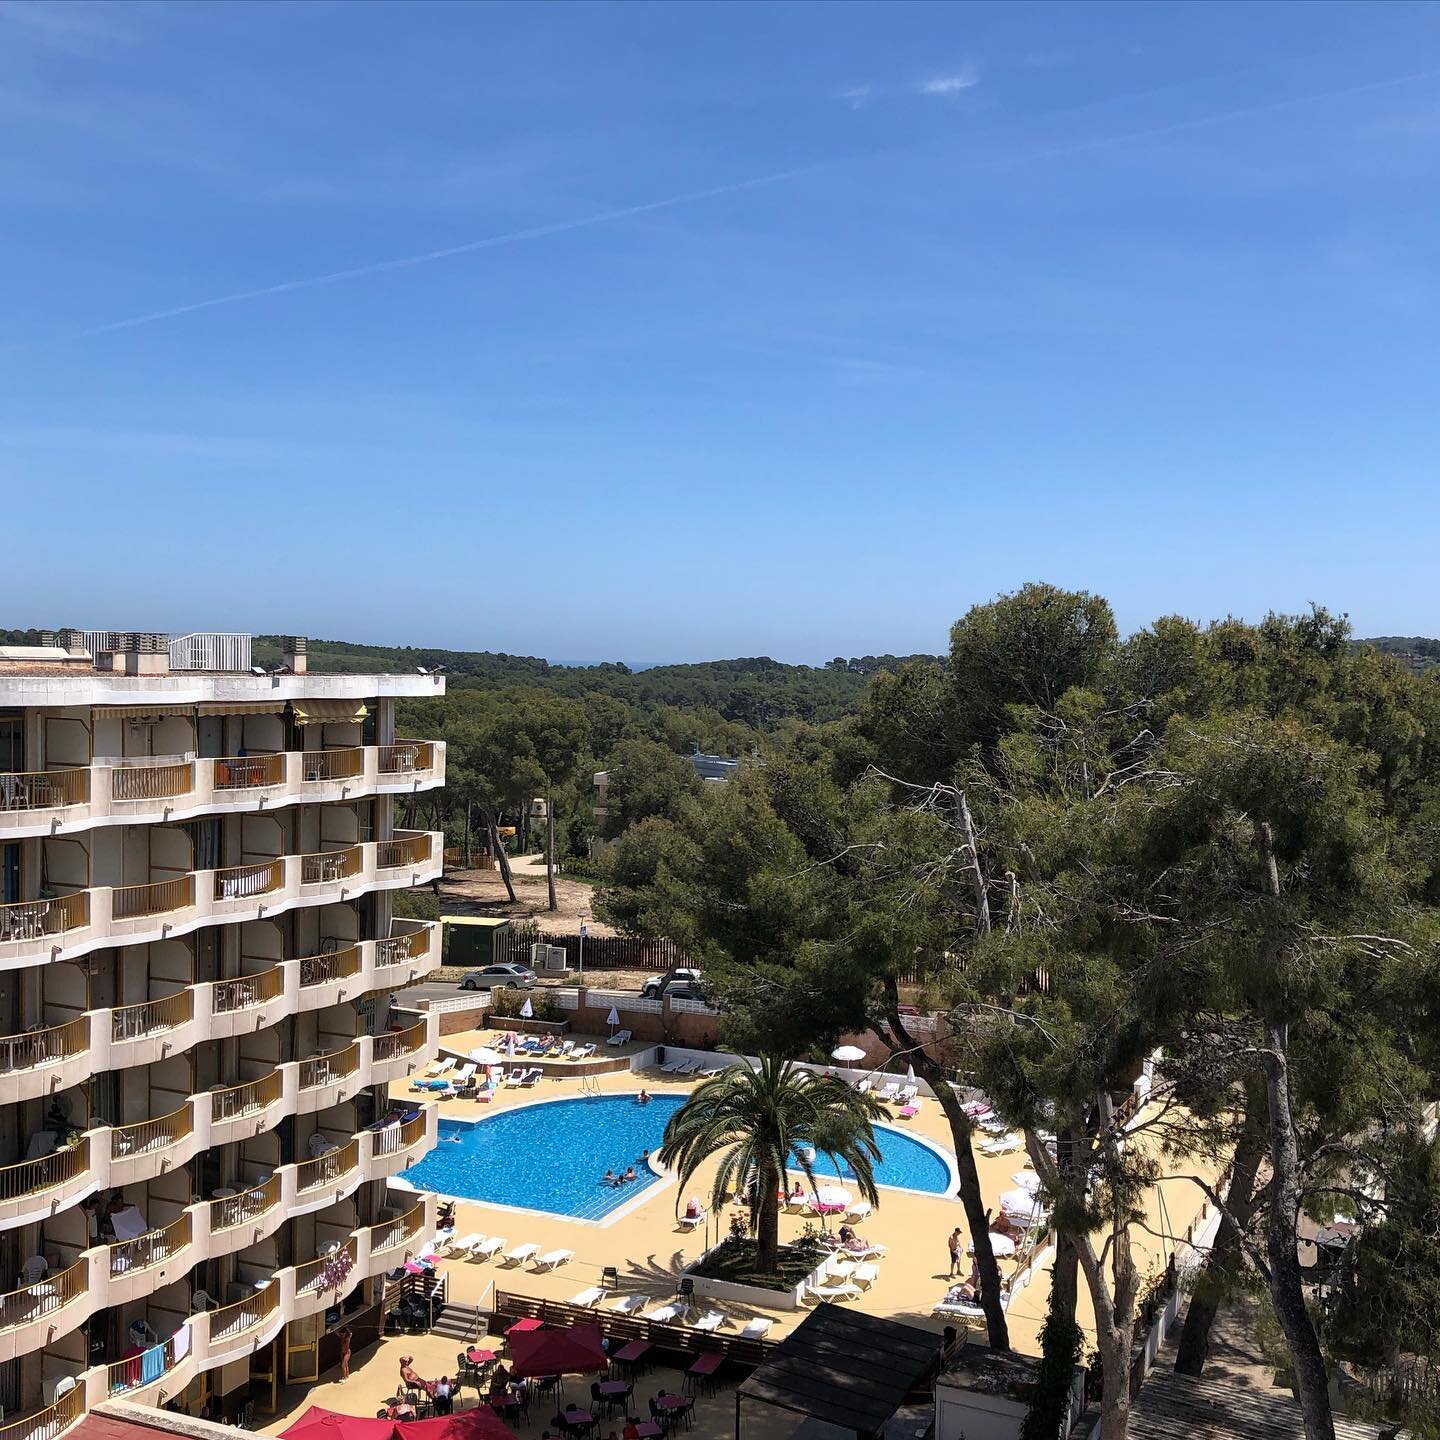 As much as I&rsquo;m missing you all and I know soph is crying over missing me! This view makes it a little easier to get through! 

ID view from Kym&rsquo;s hotel in Salou Spain palm trees and pools.

#podcast #queer #holiday #spain #salou #filmpodc